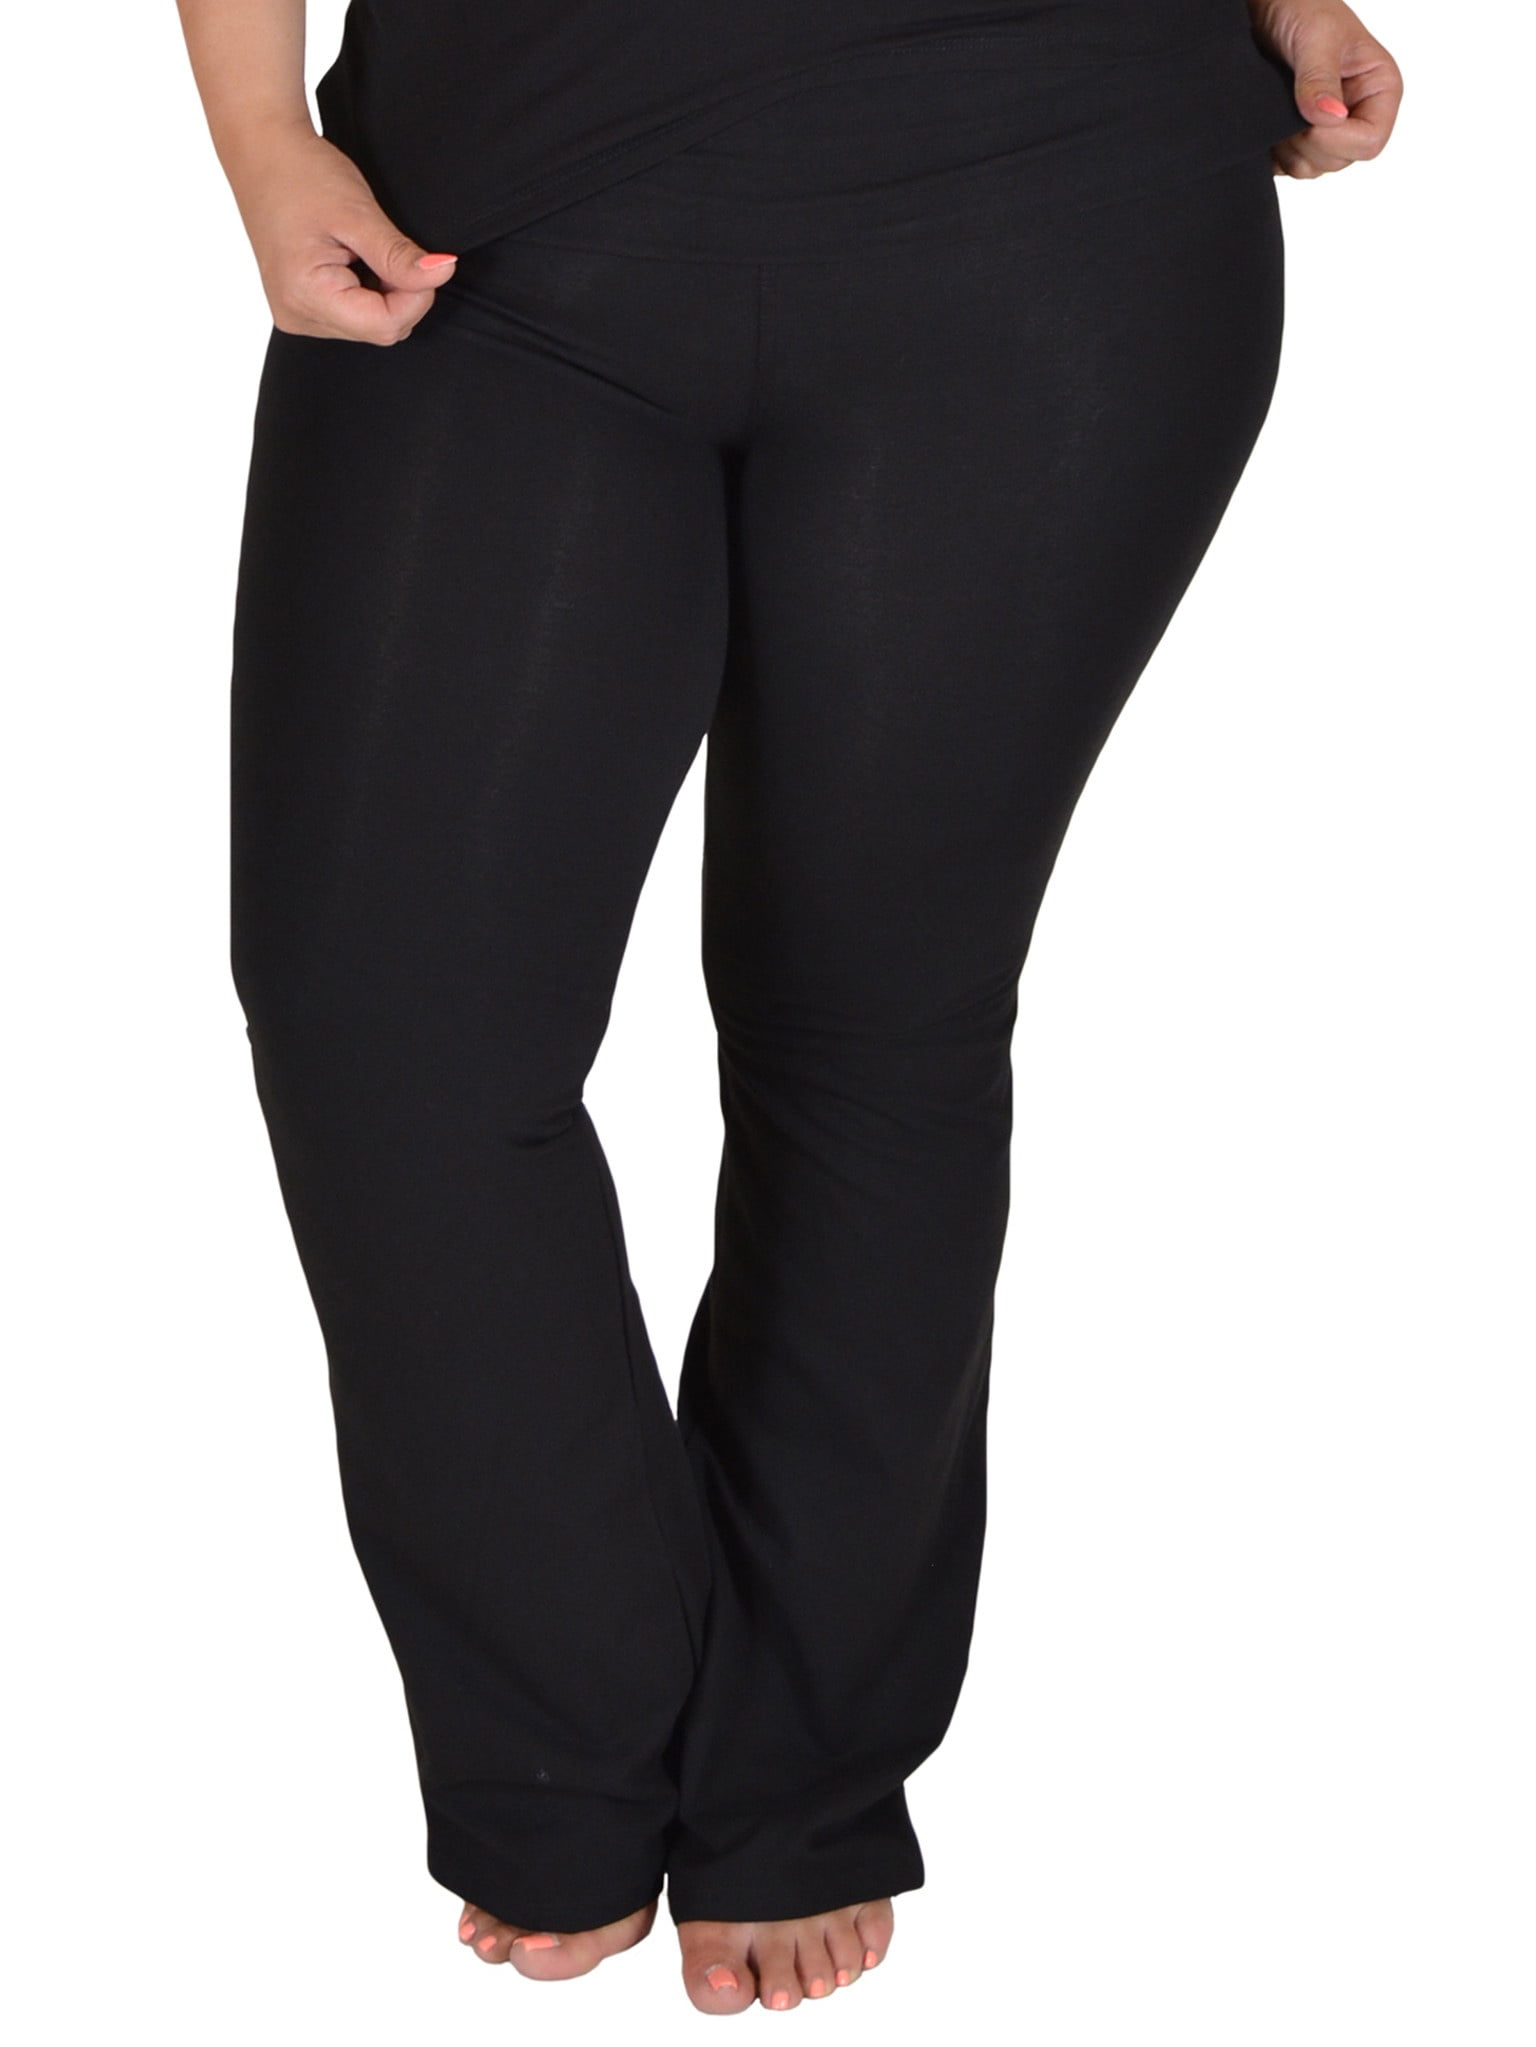 Stretch Is Comfort - Women's and Girl's Cotton Yoga Pants| Cotton ...